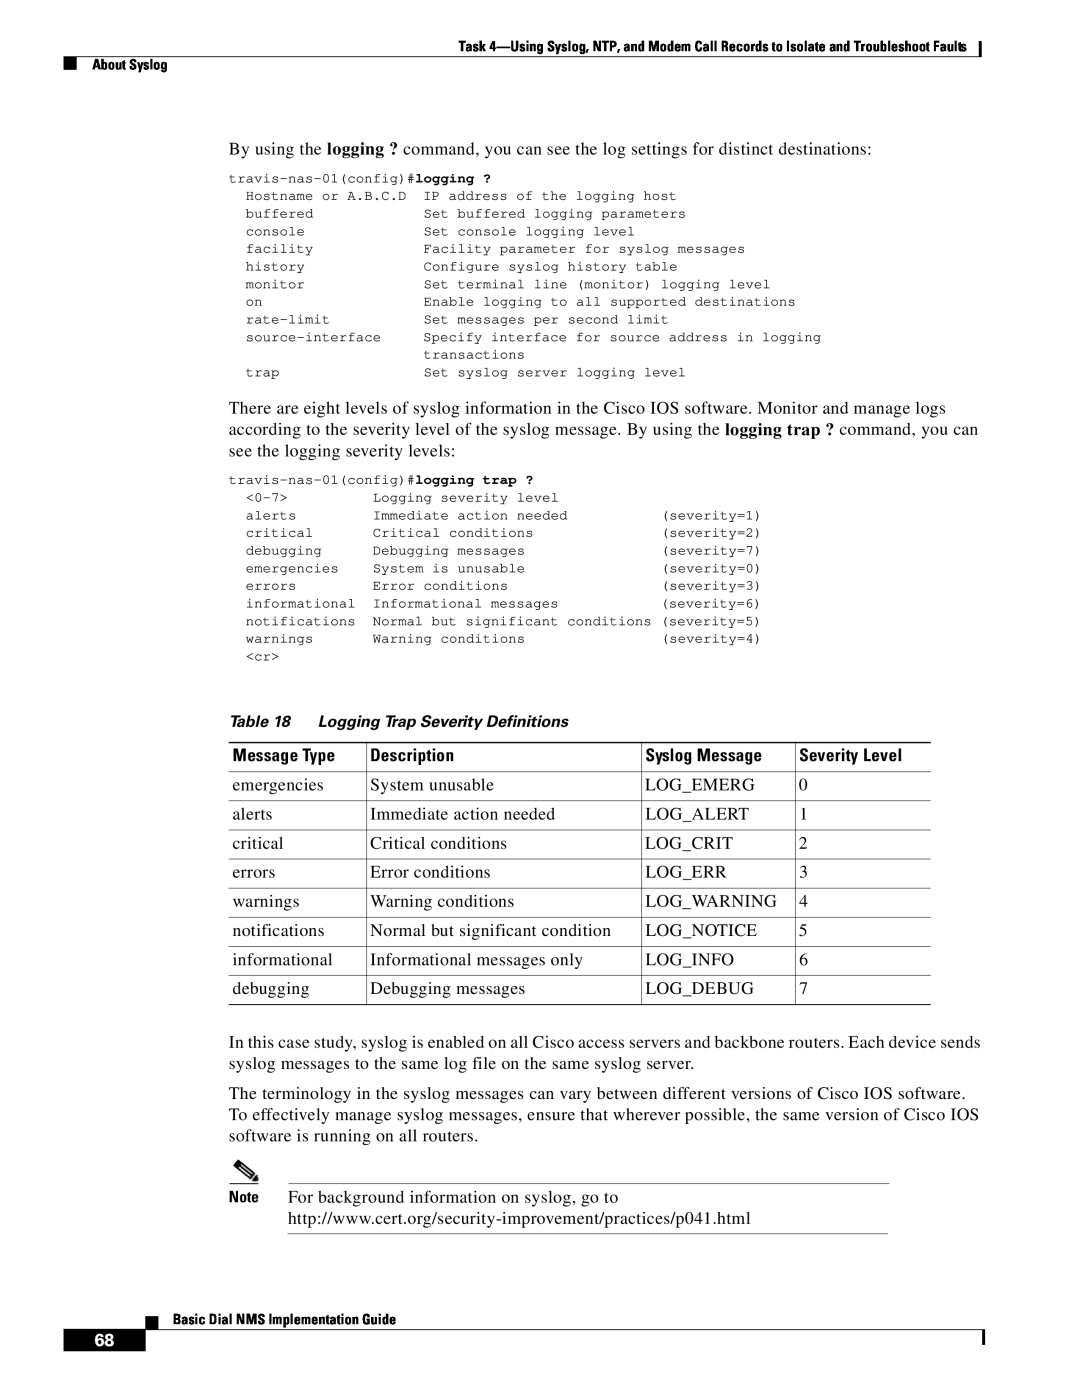 Cisco Systems Dial NMS manual emergencies 